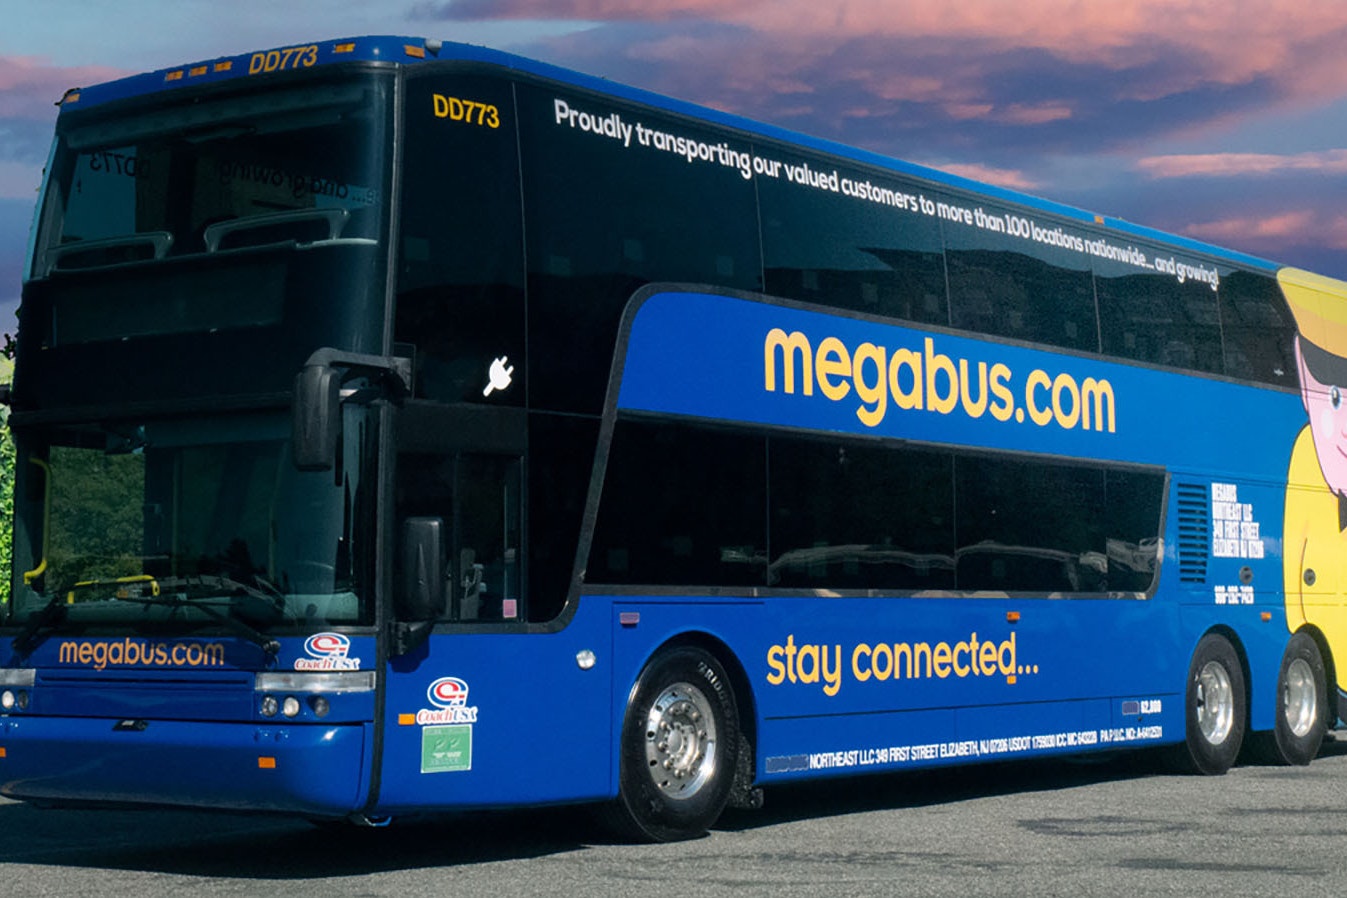 Megabus is partnering with Express Arrow to provide, and potentially expand, bus service throughout Wyoming and the region.